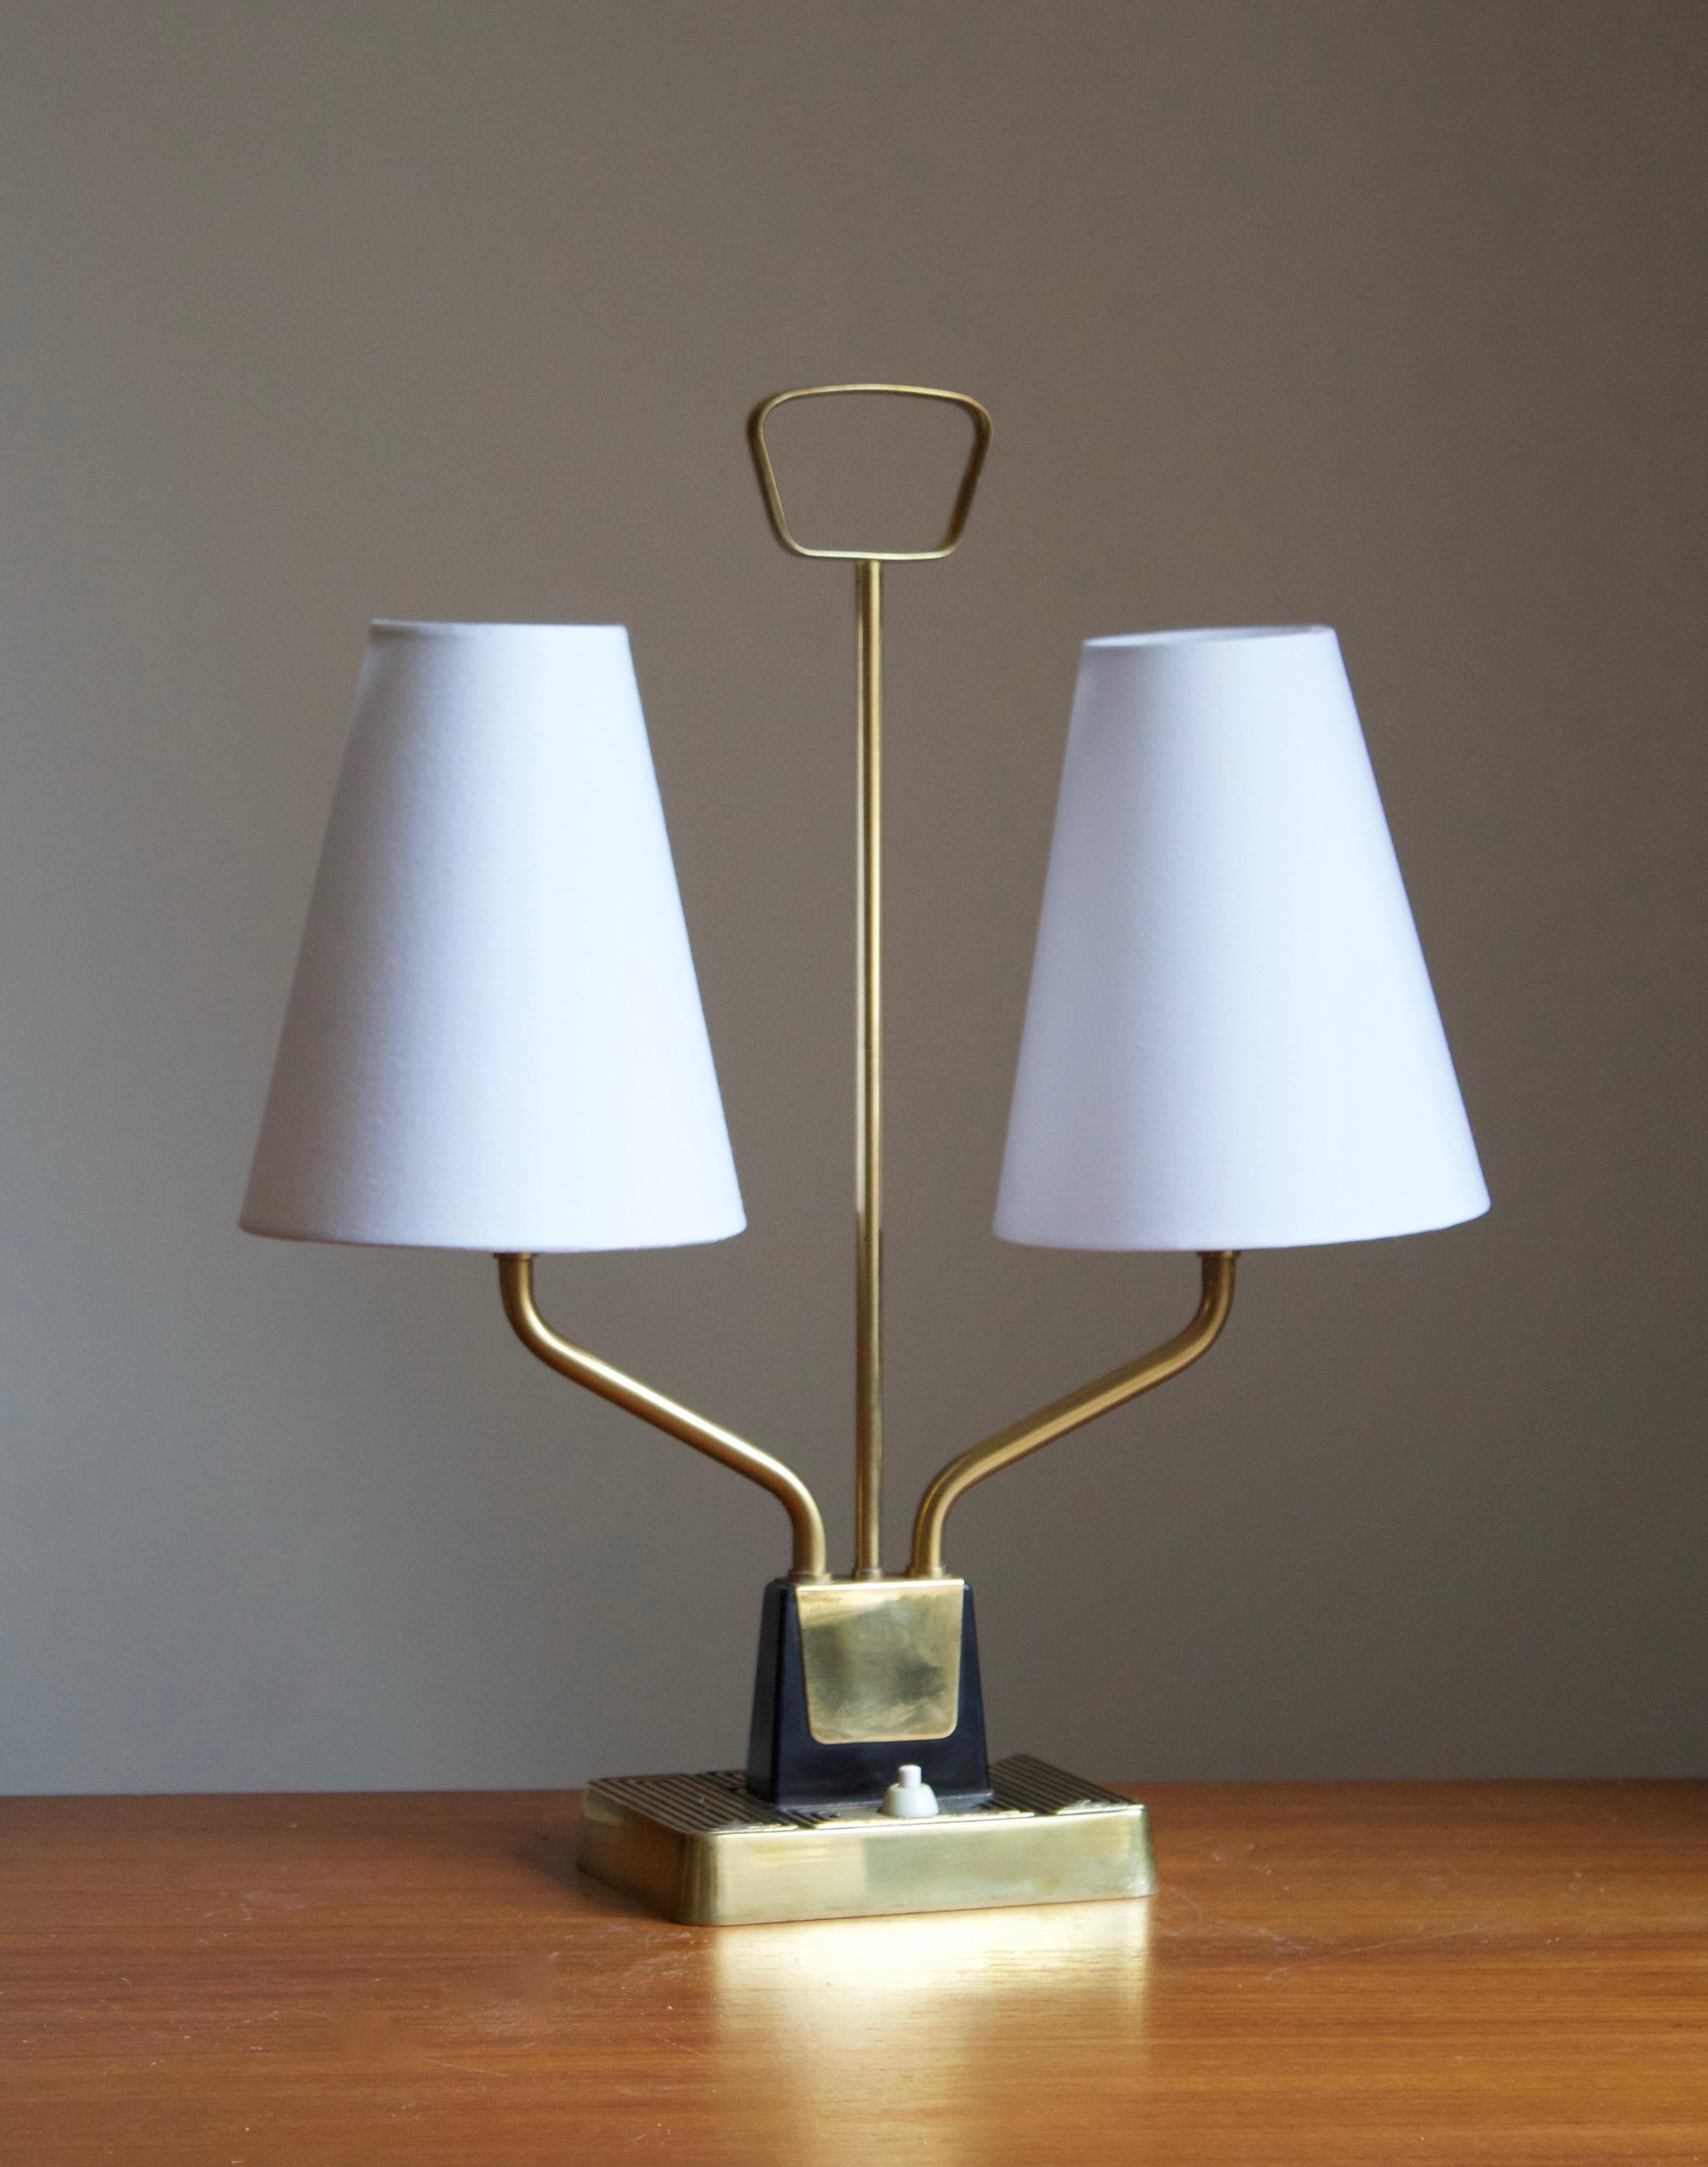 A table lamp / desk light. Designed by Swedish sculptor Sonja Katzin, (1919-2014). Produced by ASEA, Sweden, 1950s. Stamped.

Stated dimensions include lampshades.